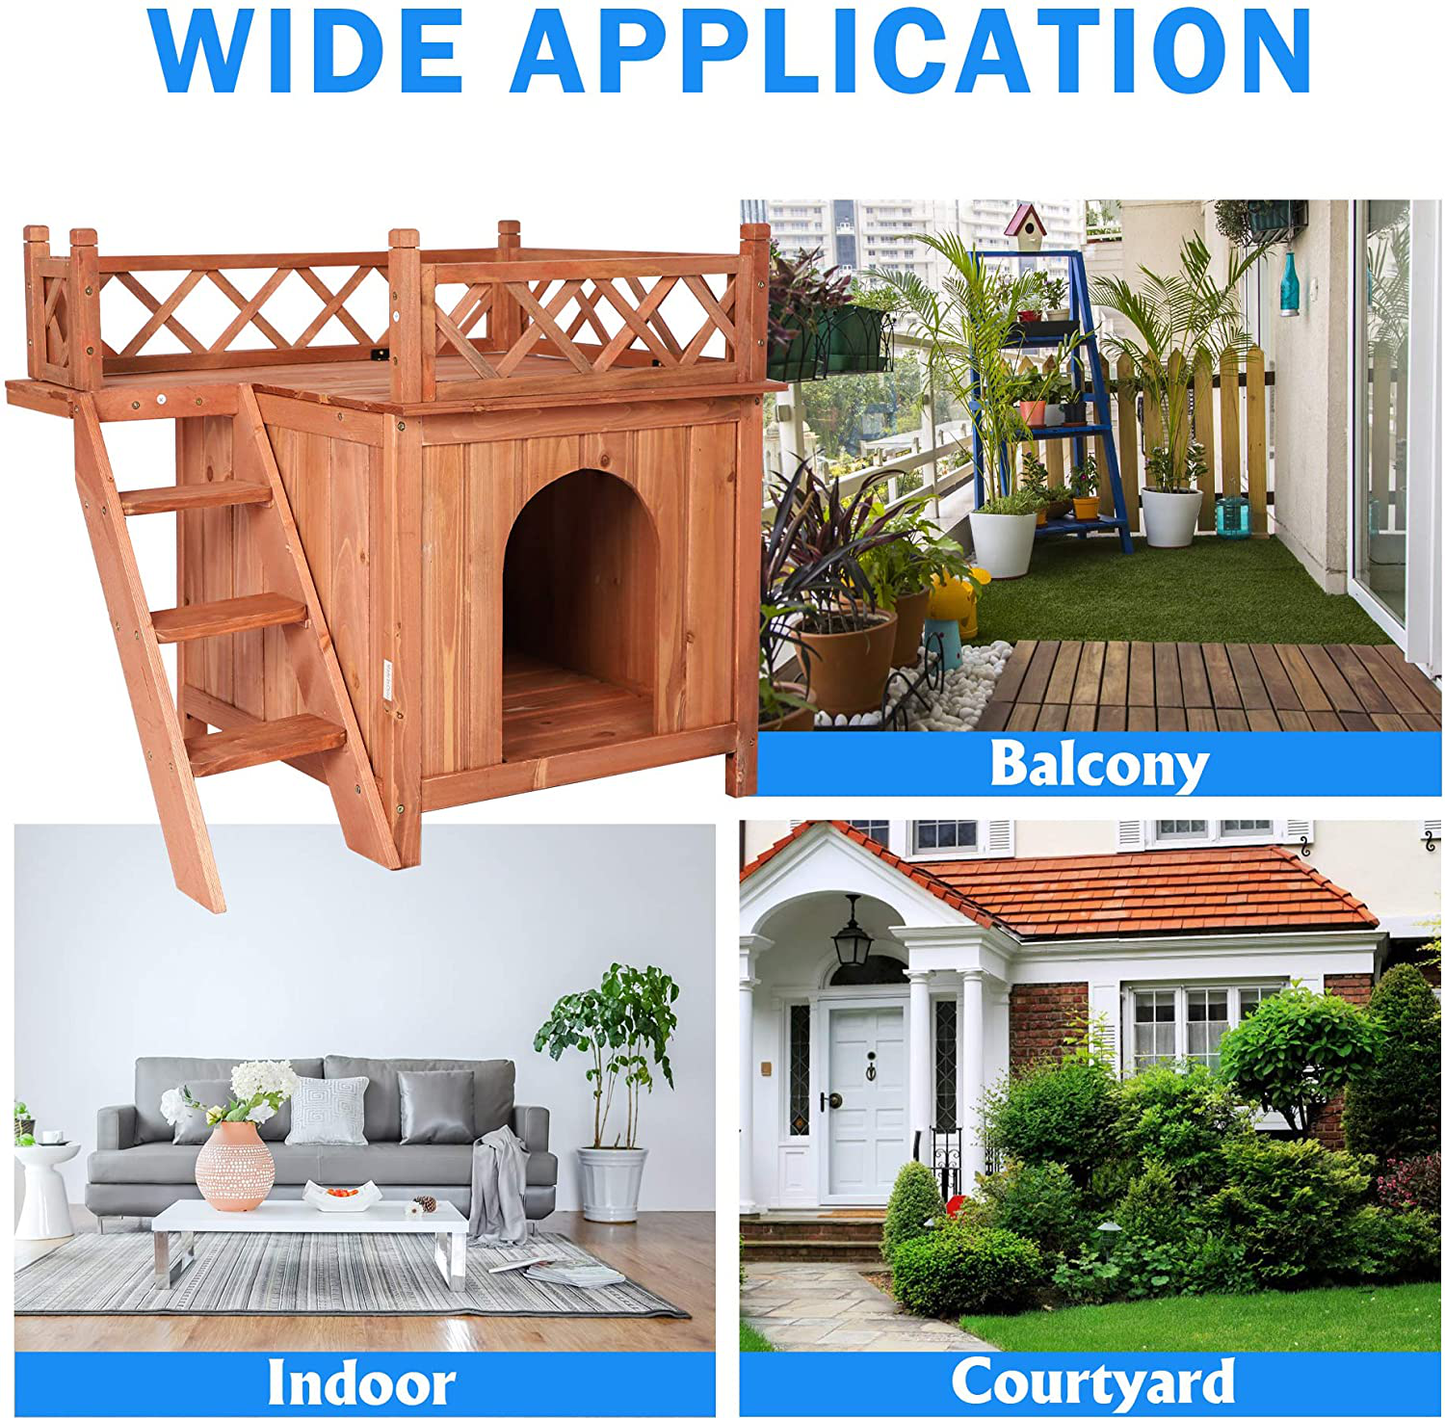 LONABR Wooden Pet Dog House 2 Tier Dog Room Shelter with Stairs and Balcony,All-Weather Puppy House for Indoor, Outdoor